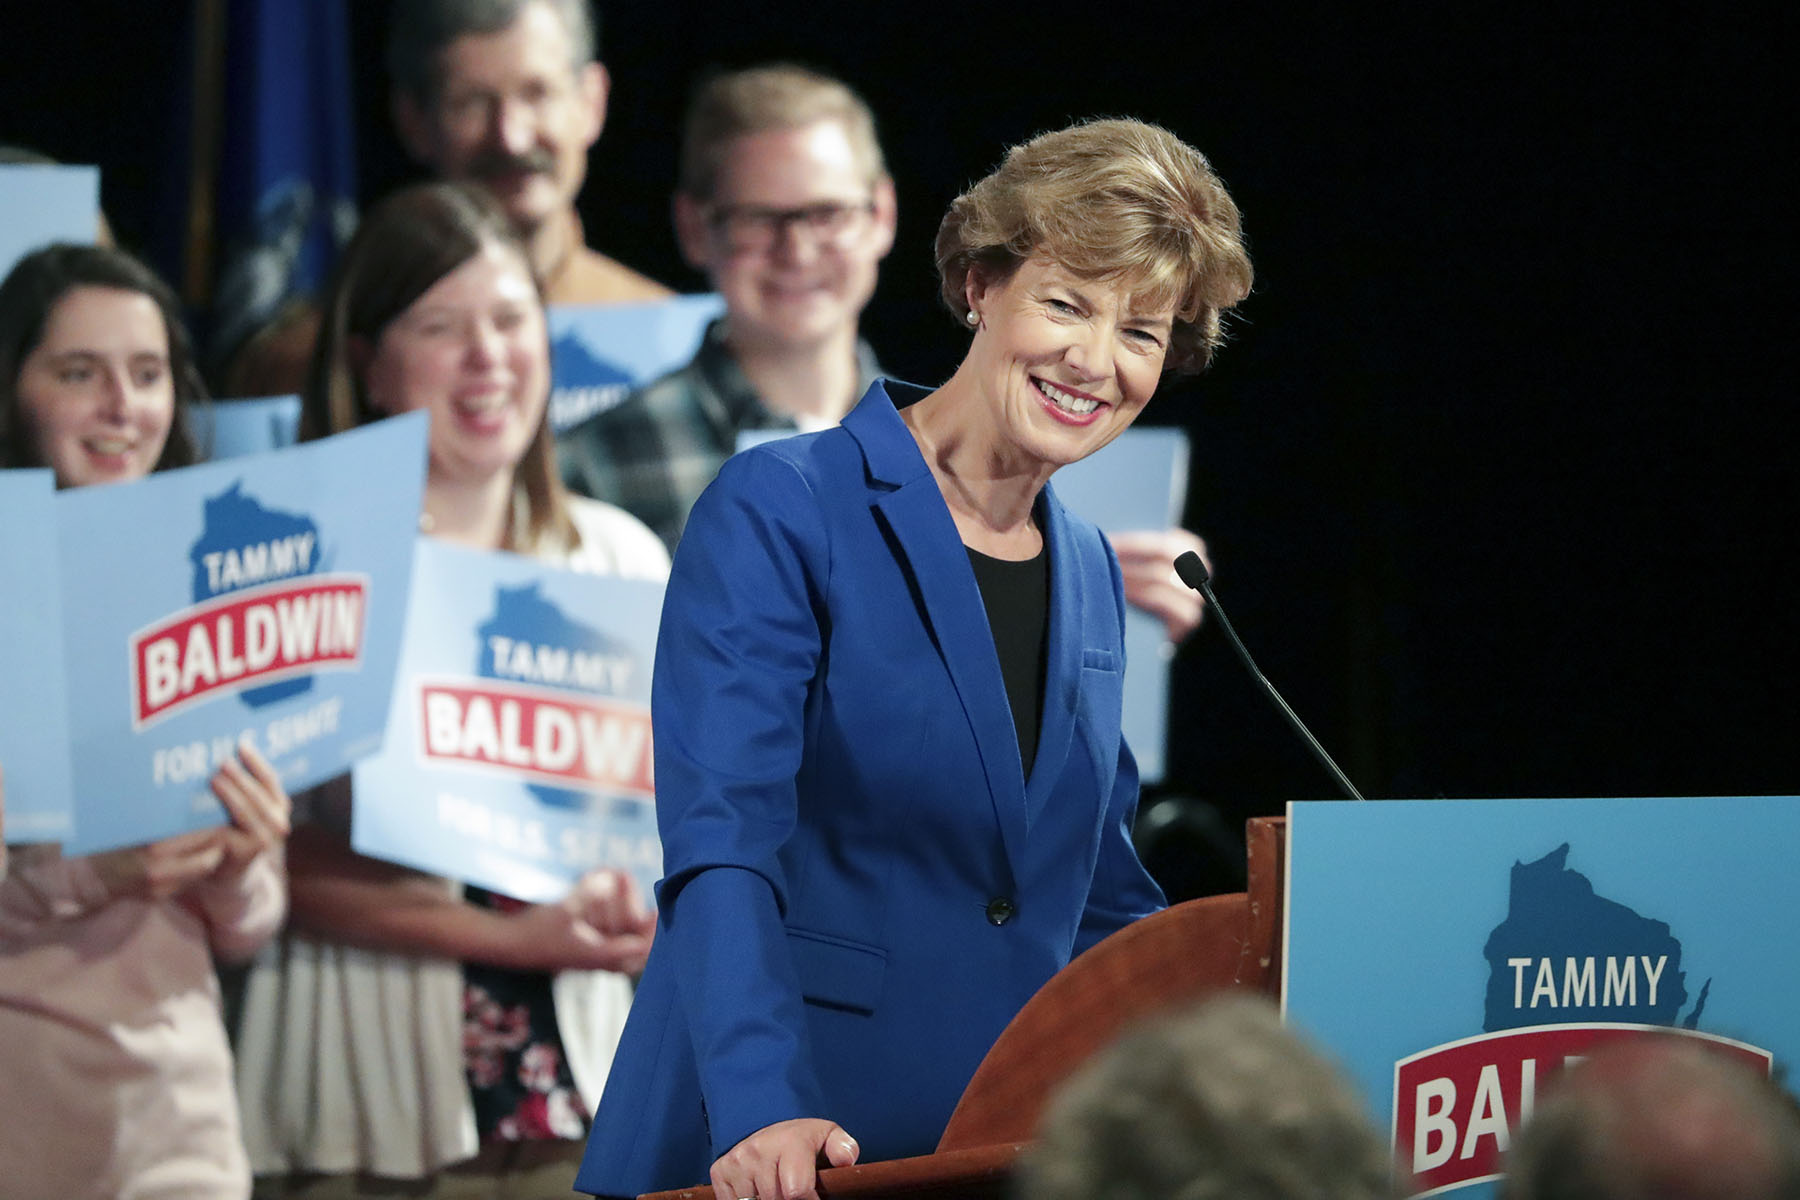 Tammy Baldwin celebrates her re-election victory in Madison, Wisconsin in November 2018.